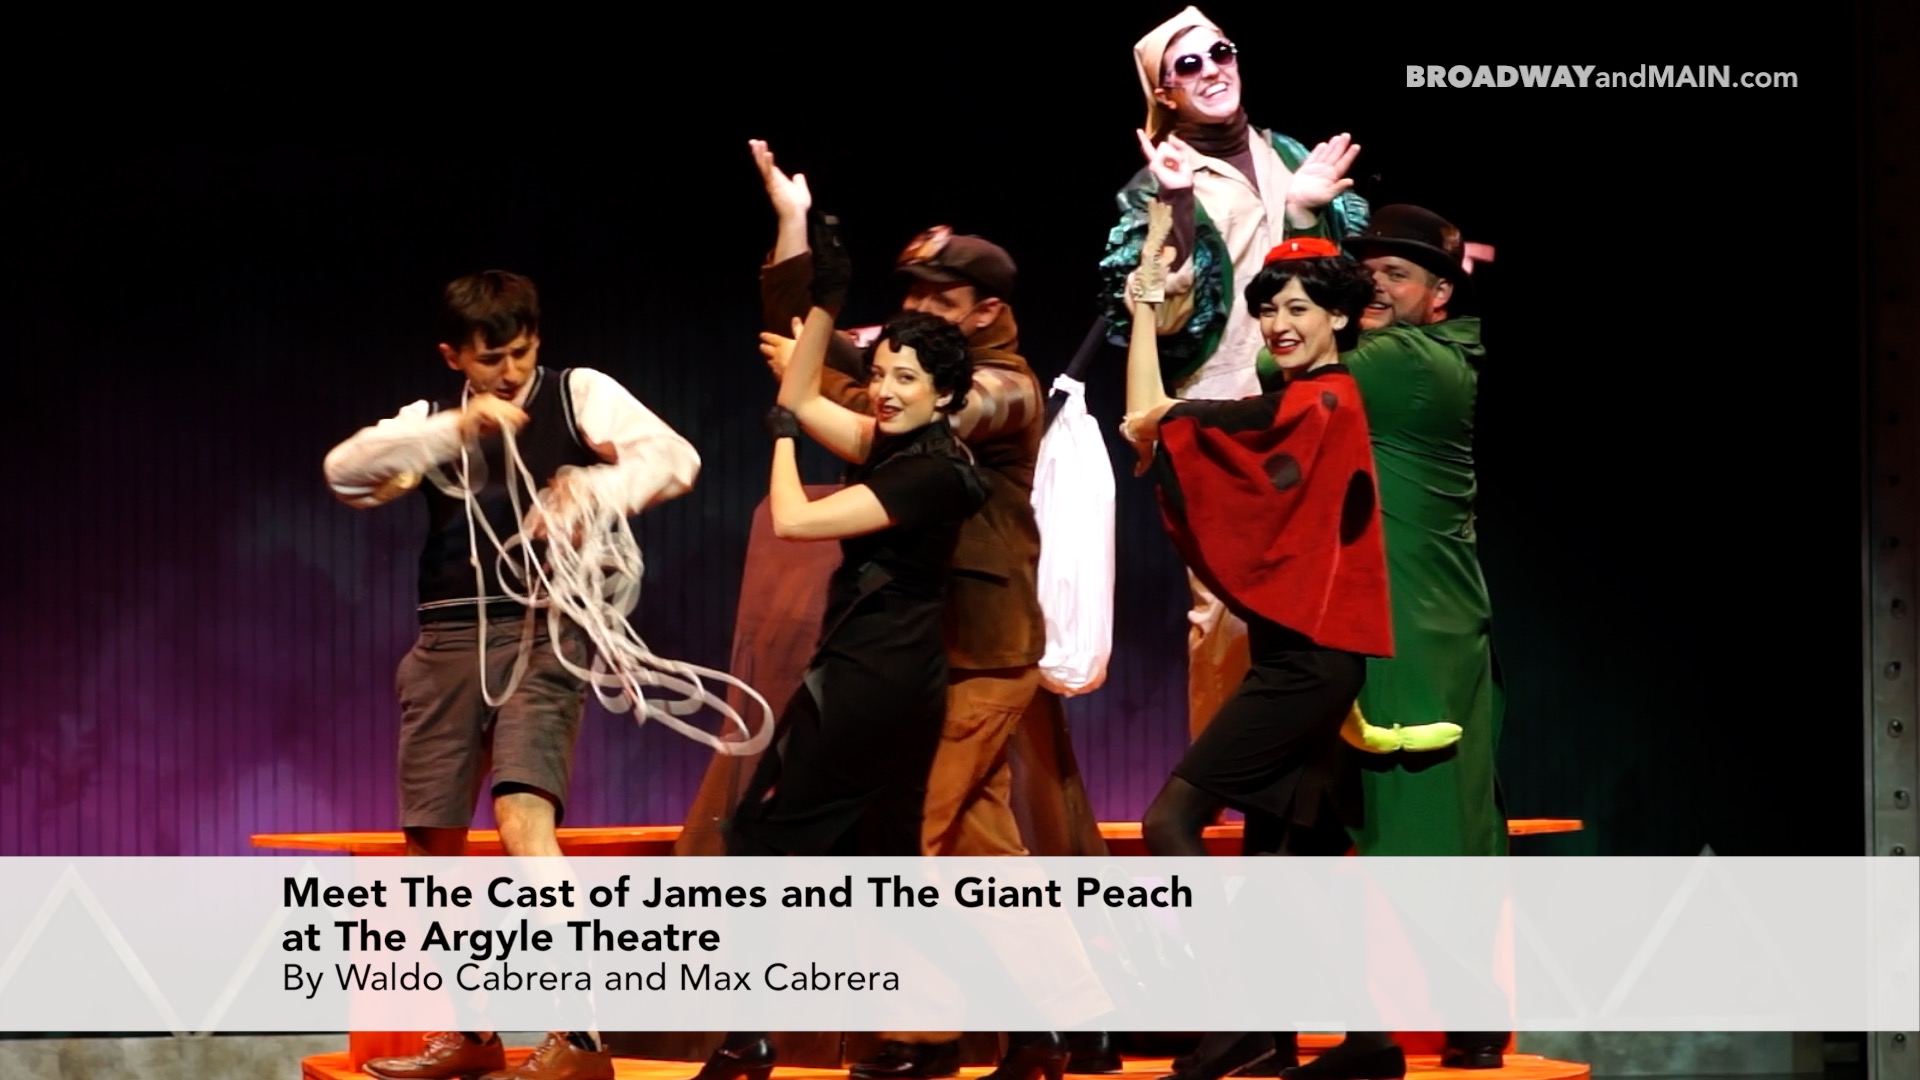 Meet The Cast of James and The Giant Peach at The Argyle Theatre